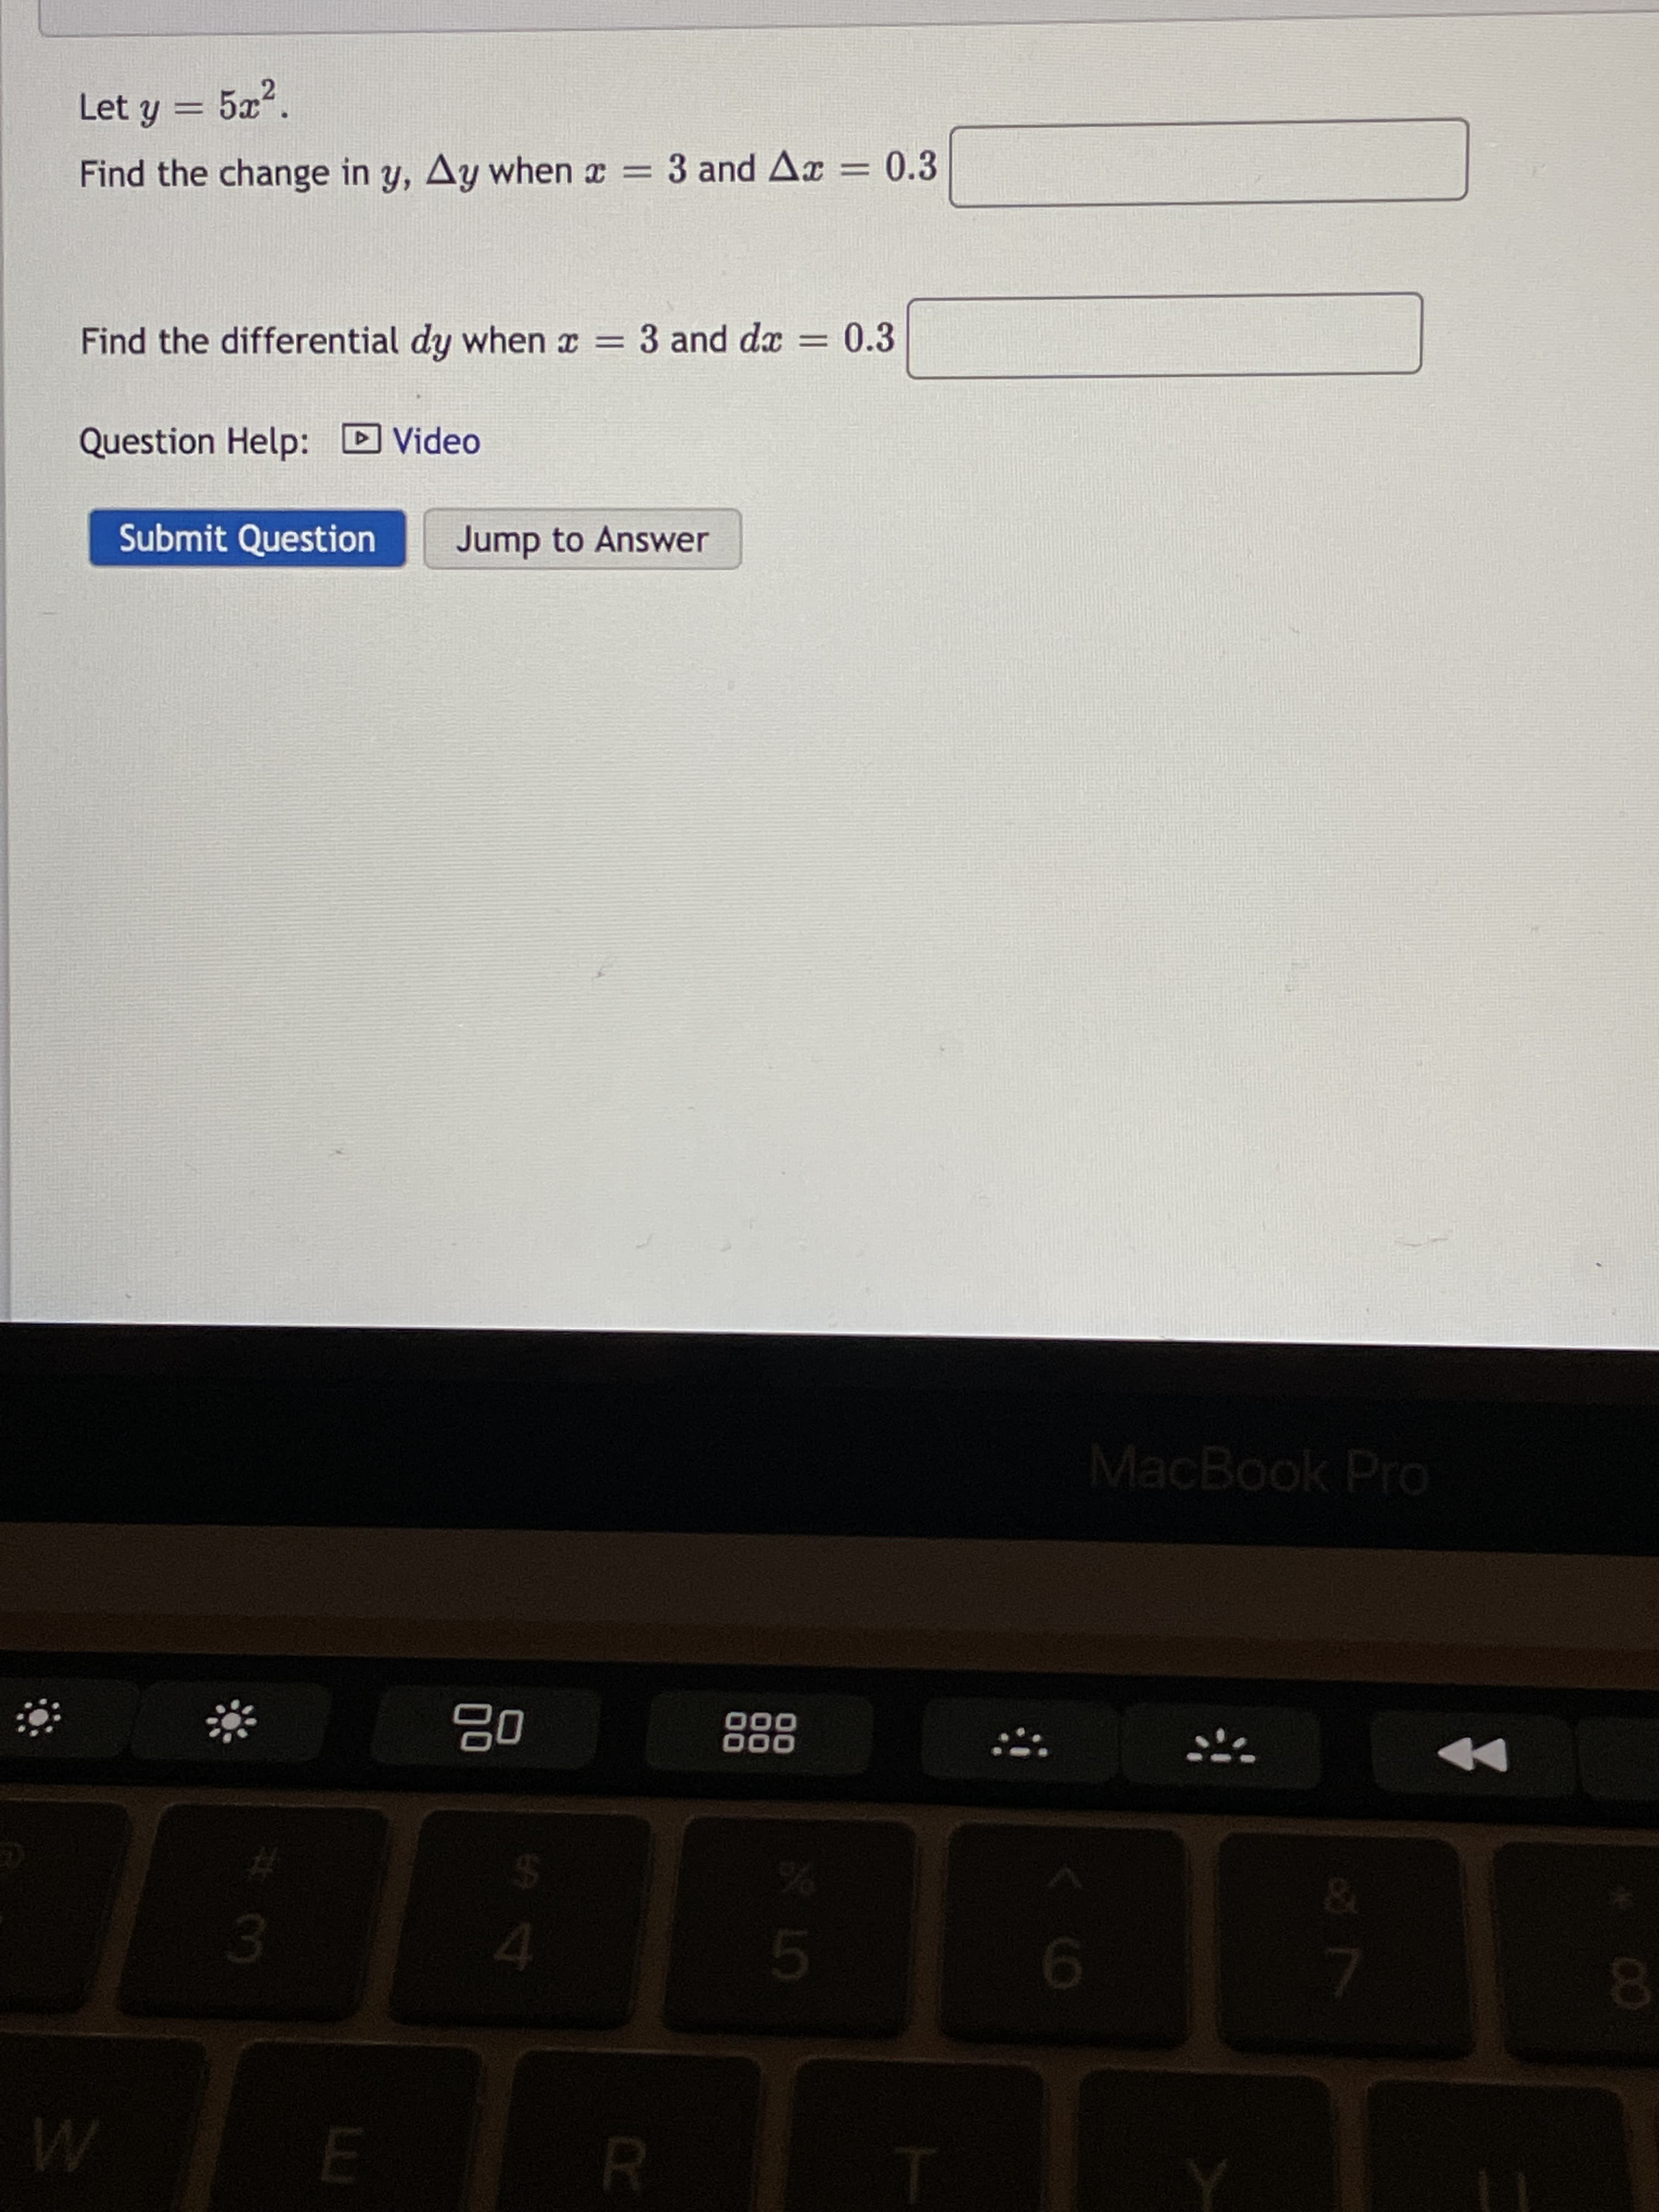 LU
Let y = 5x?.
Find the change in y, Ay when a = 3 and Ax = 0.3
Find the differential dy when x = 3 and dx = 0.3
Question Help: D Video
Submit Question
Jump to Answer
MacBook Pro
000
000
24
4.
0.
